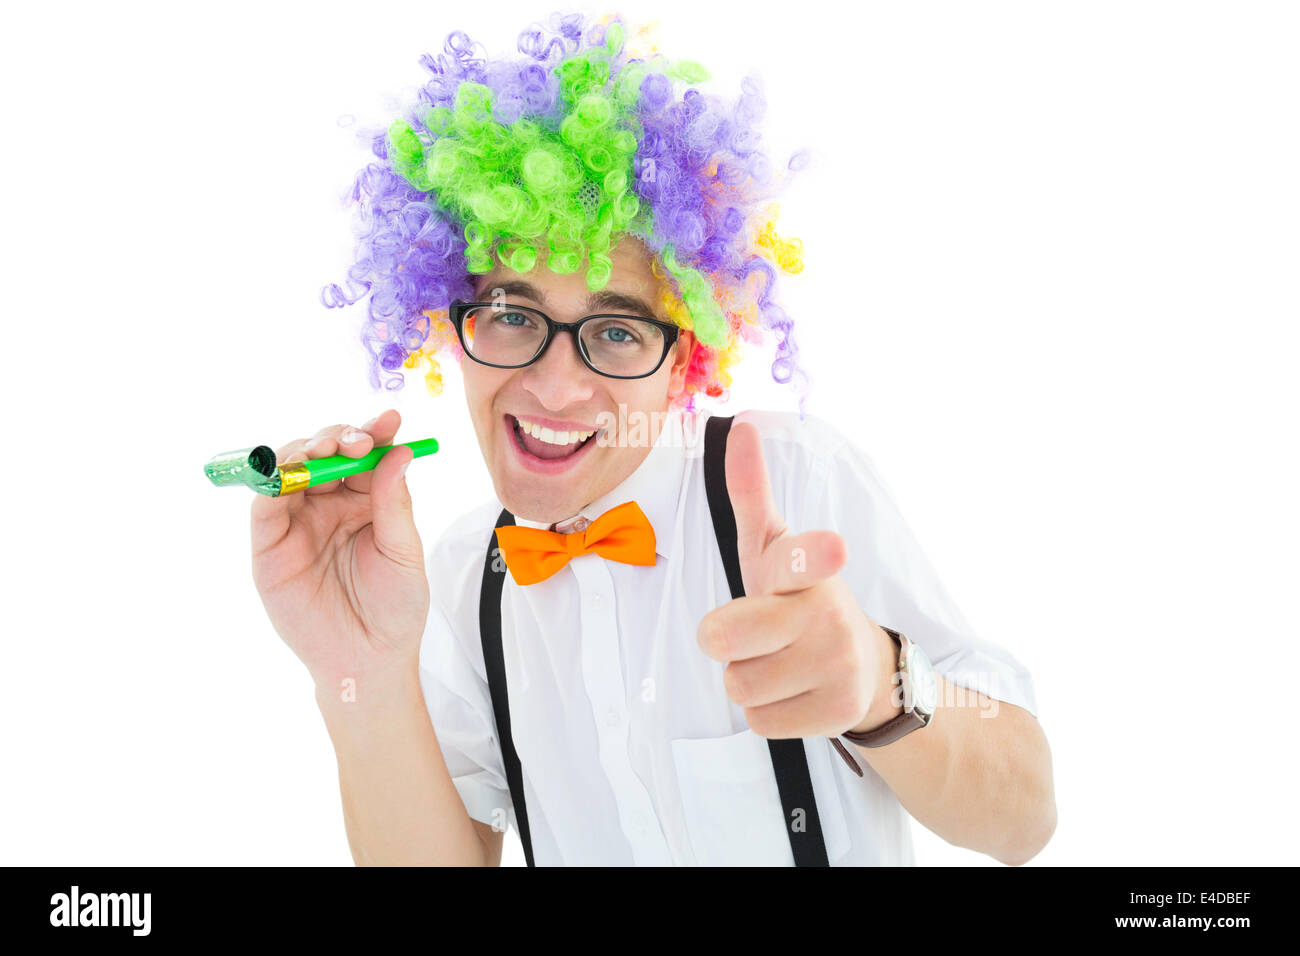 Geeky hipster in afro rainbow wig Stock Photo